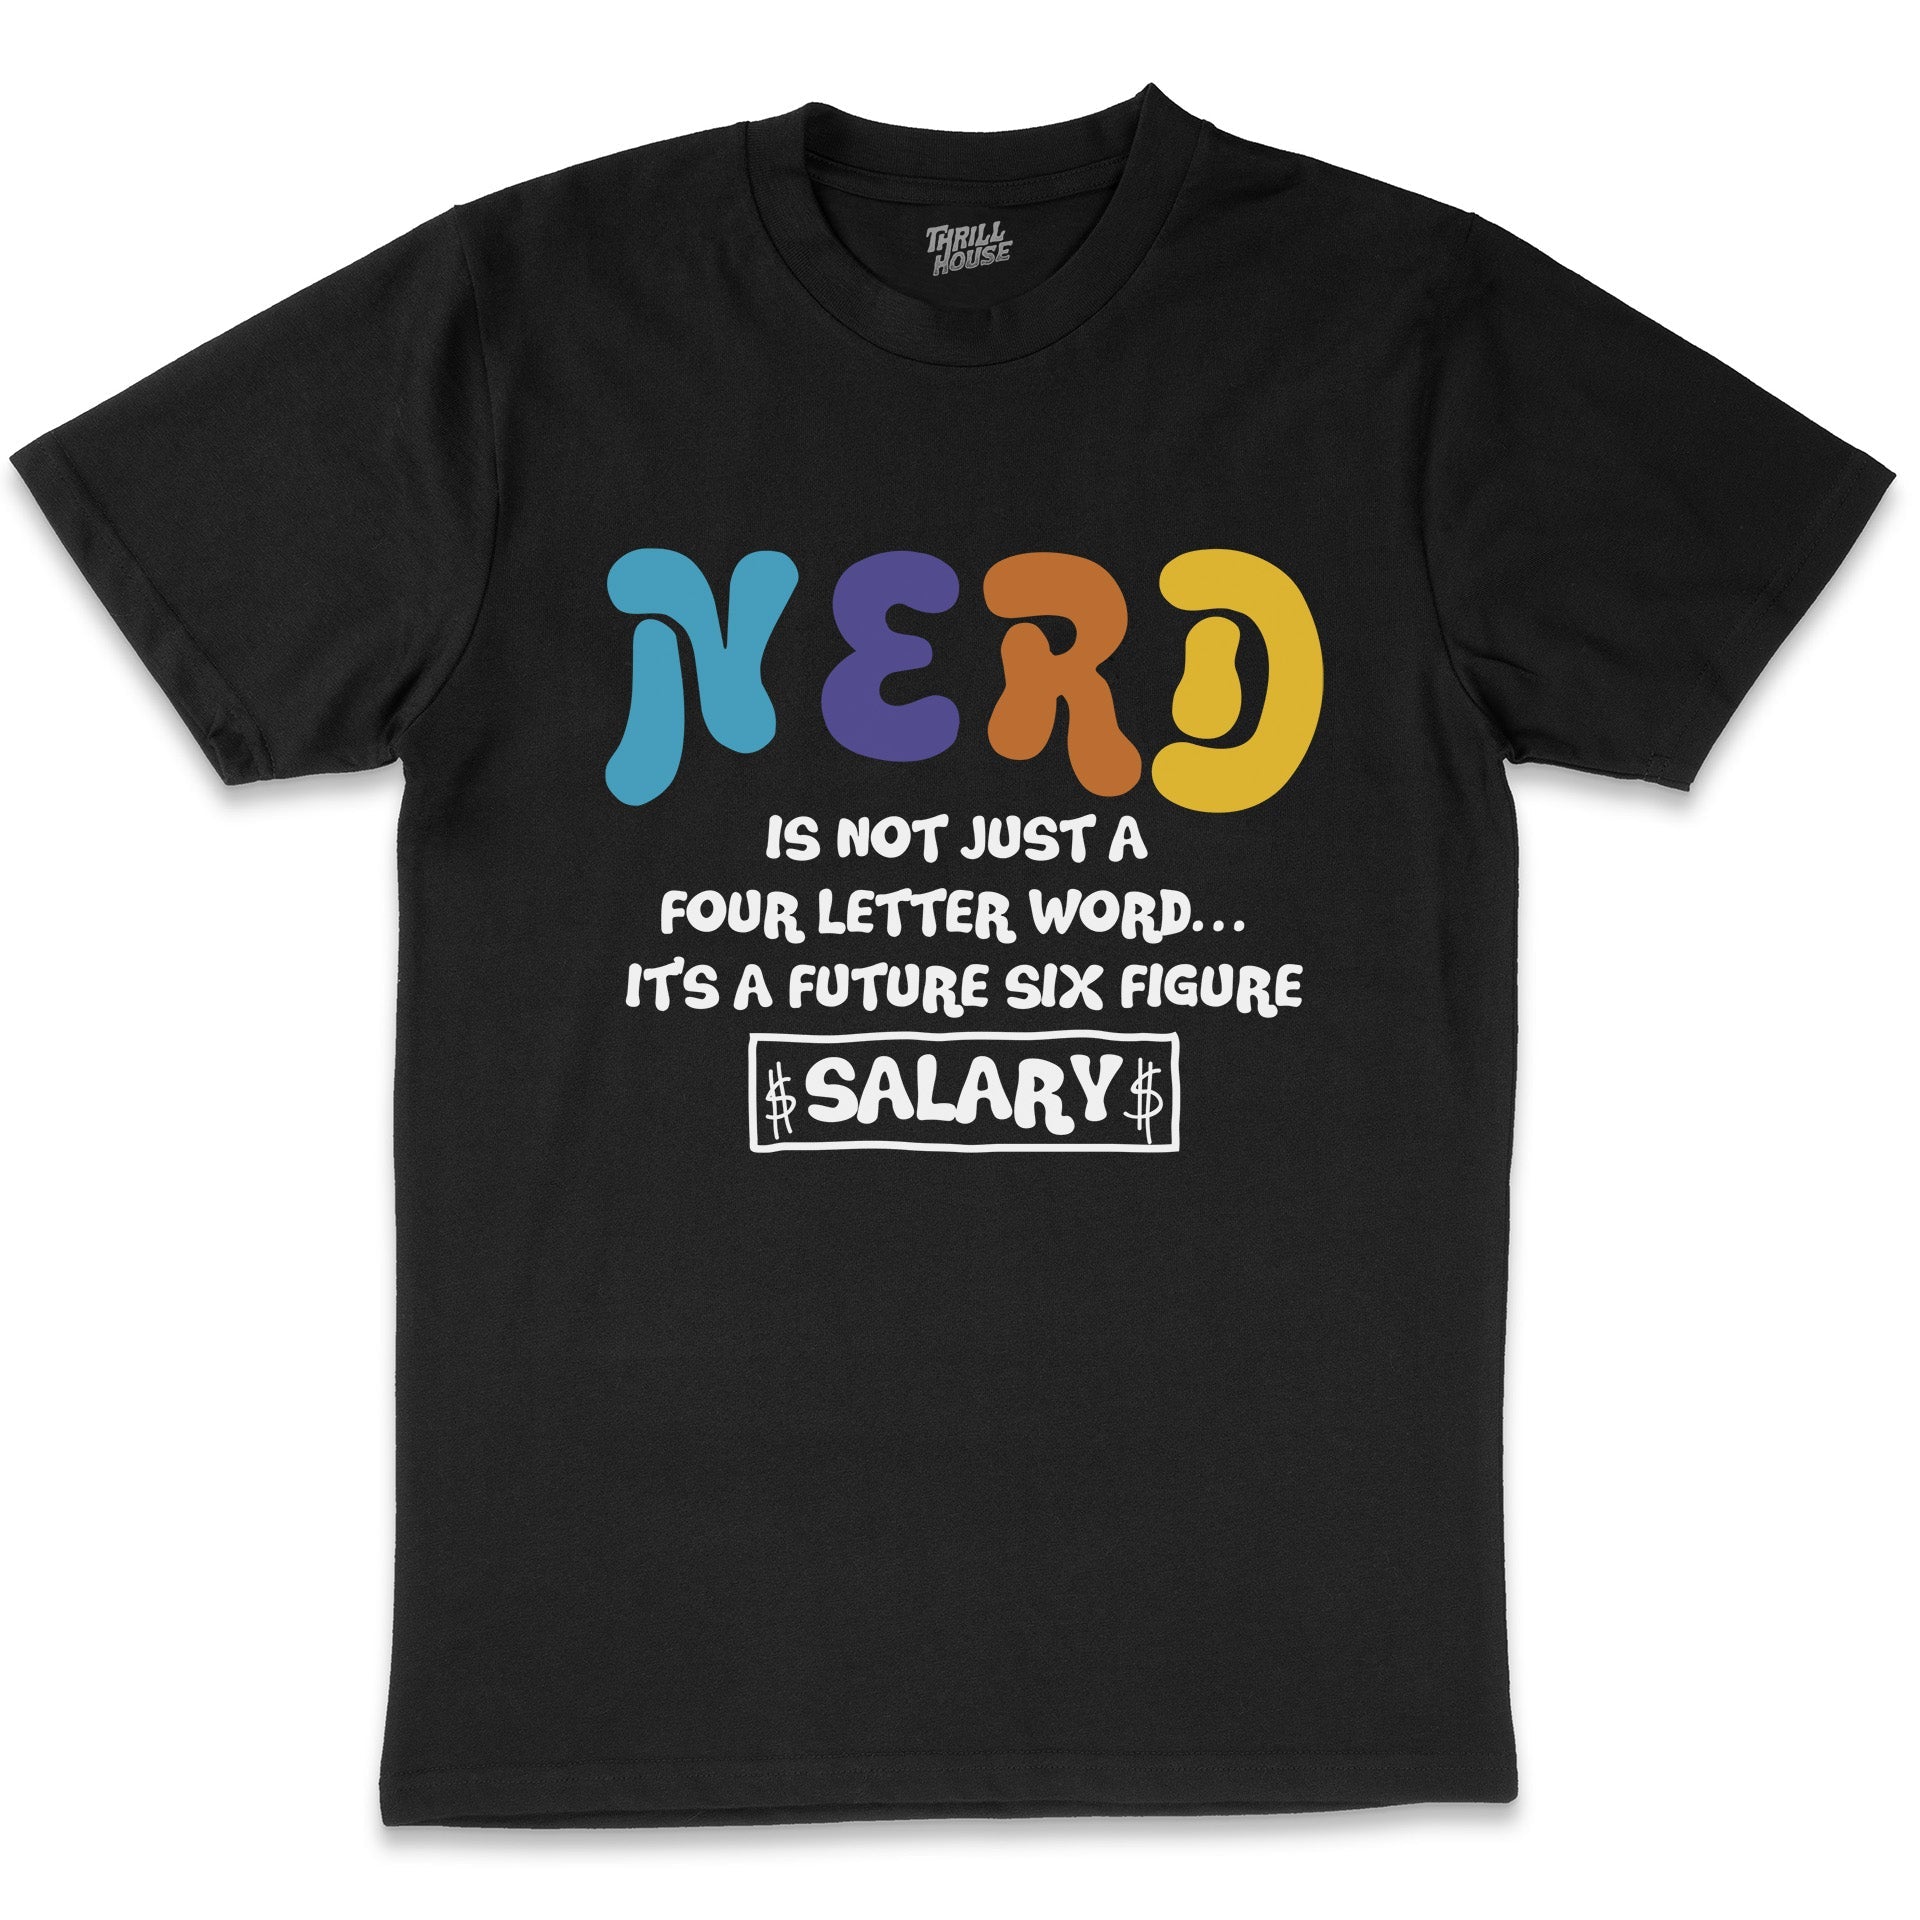 Not Just a Four Letter Word Computer Nerd Geek Humour Funny Slogan Cotton T-Shirt